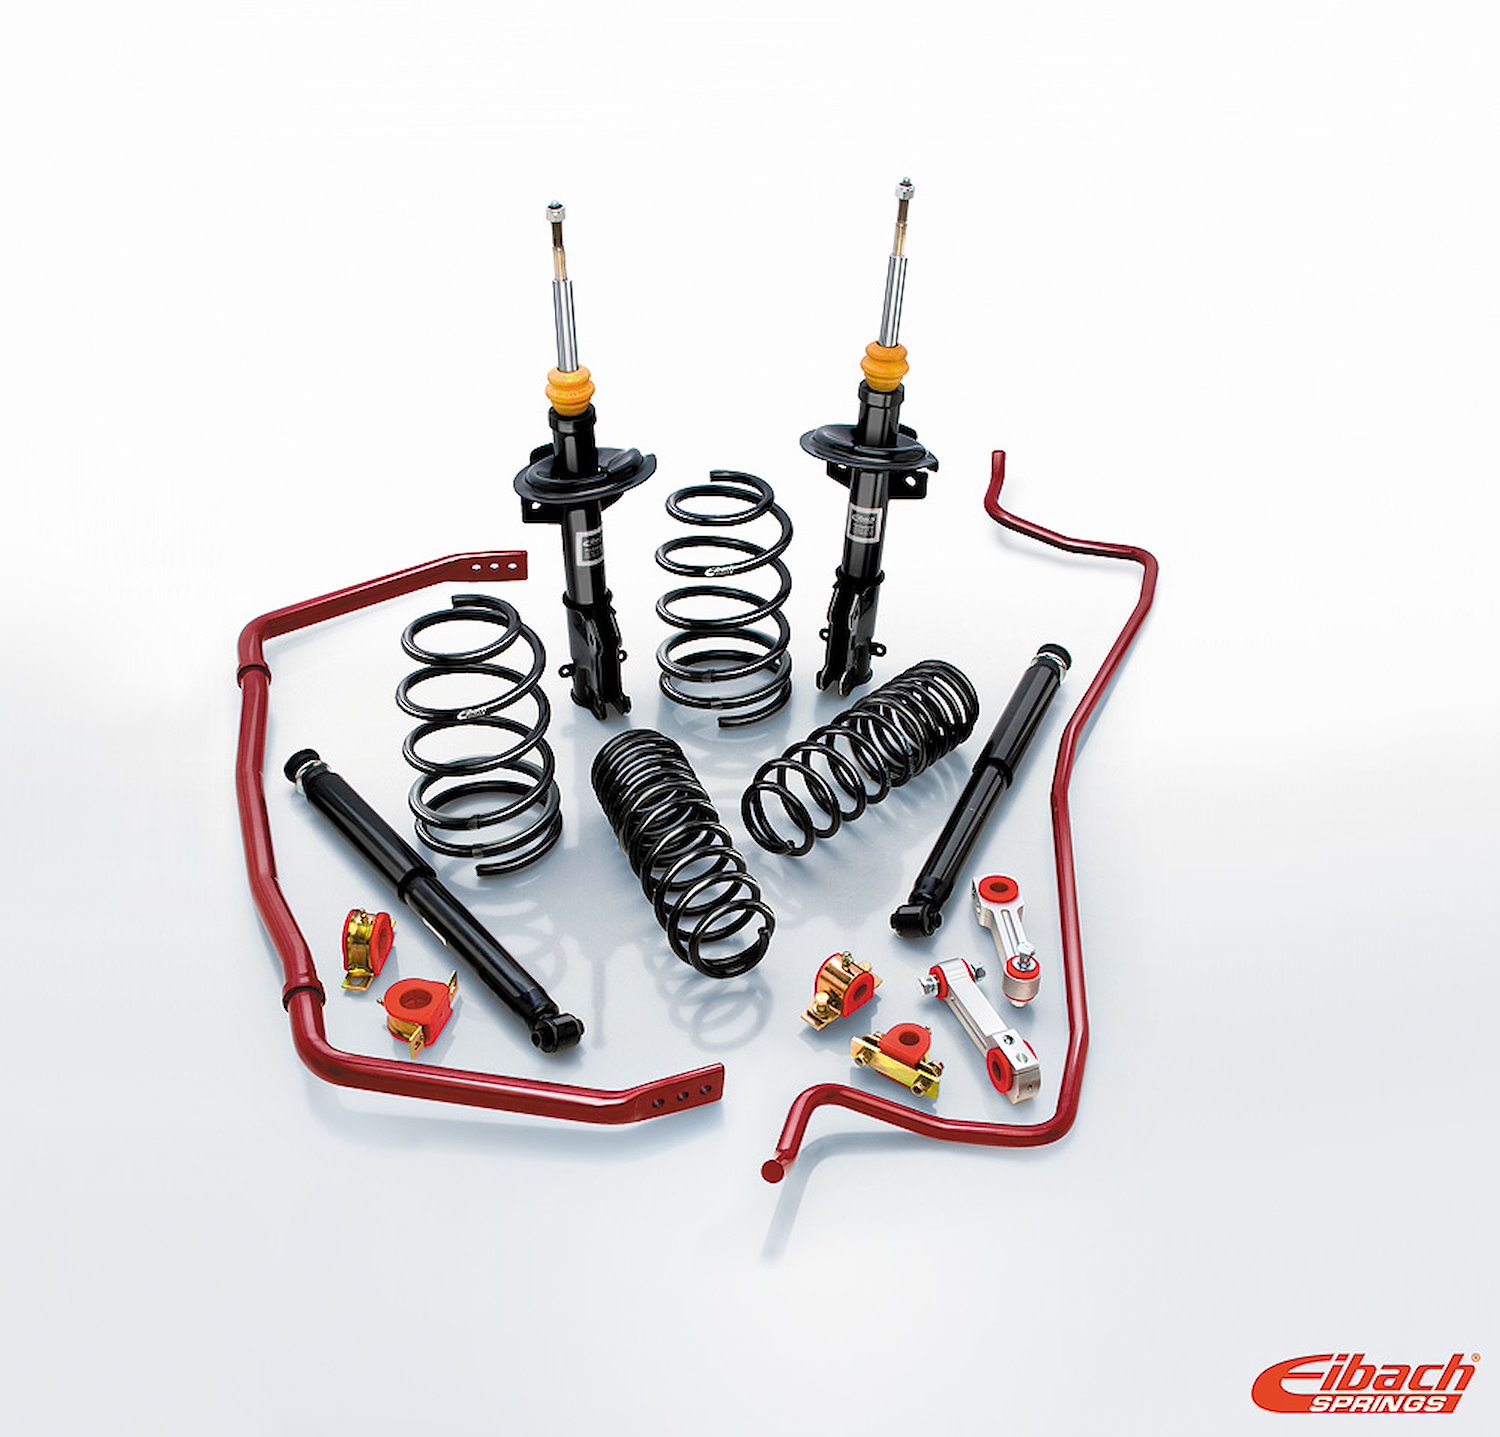 3530.680 Pro-System-Plus Suspension Kit 1994-04 Mustang V8 Convertible - 1.3" Front/1.4" Rear Drop